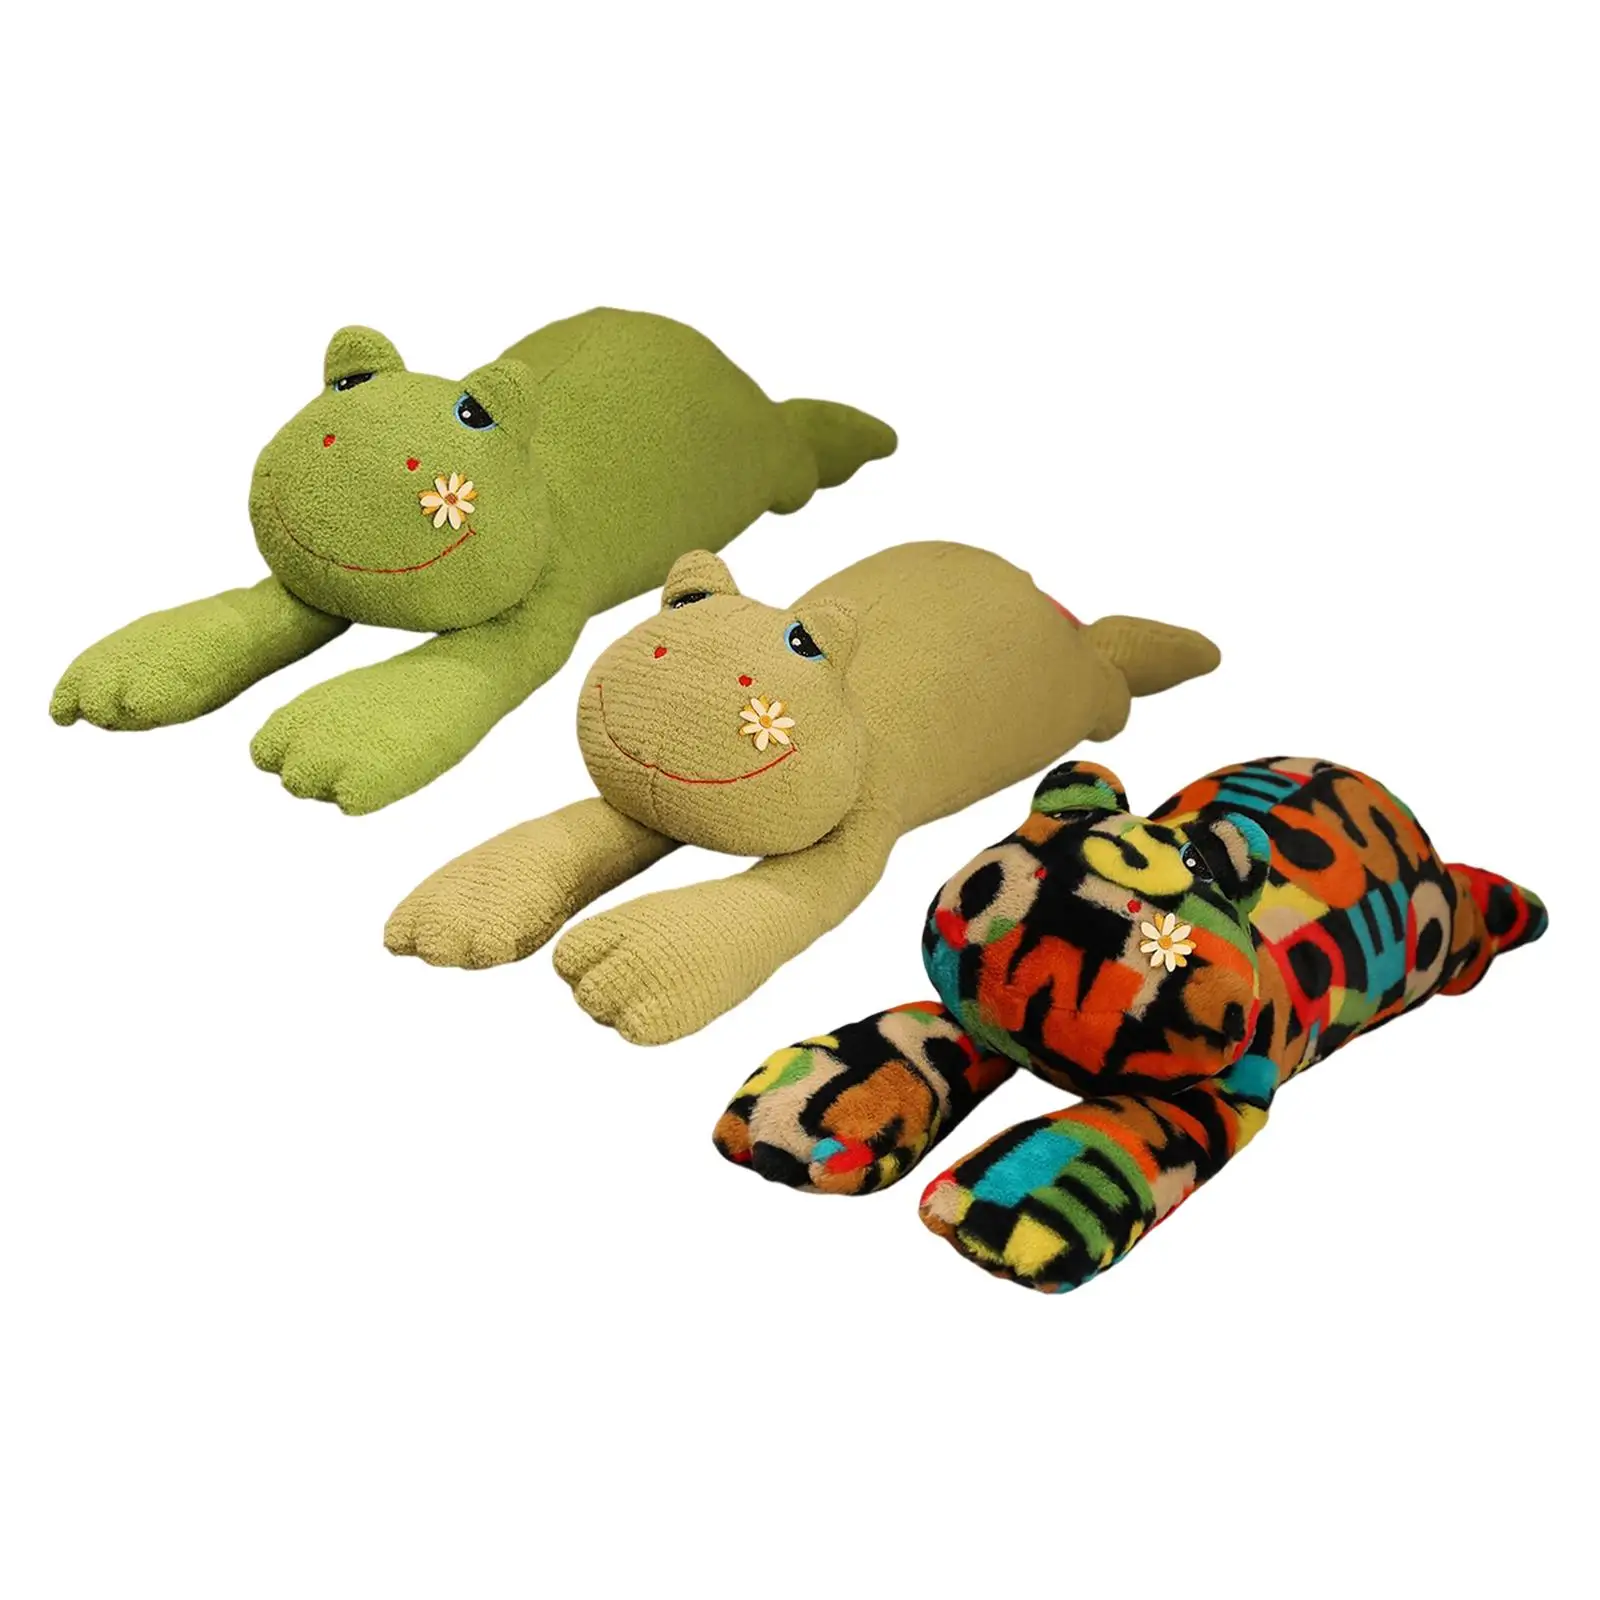 cuddly Frog Plush Doll pillow Adorable Stuffed Animal for Party Holiday Birthday Gifts Girlfriend Children